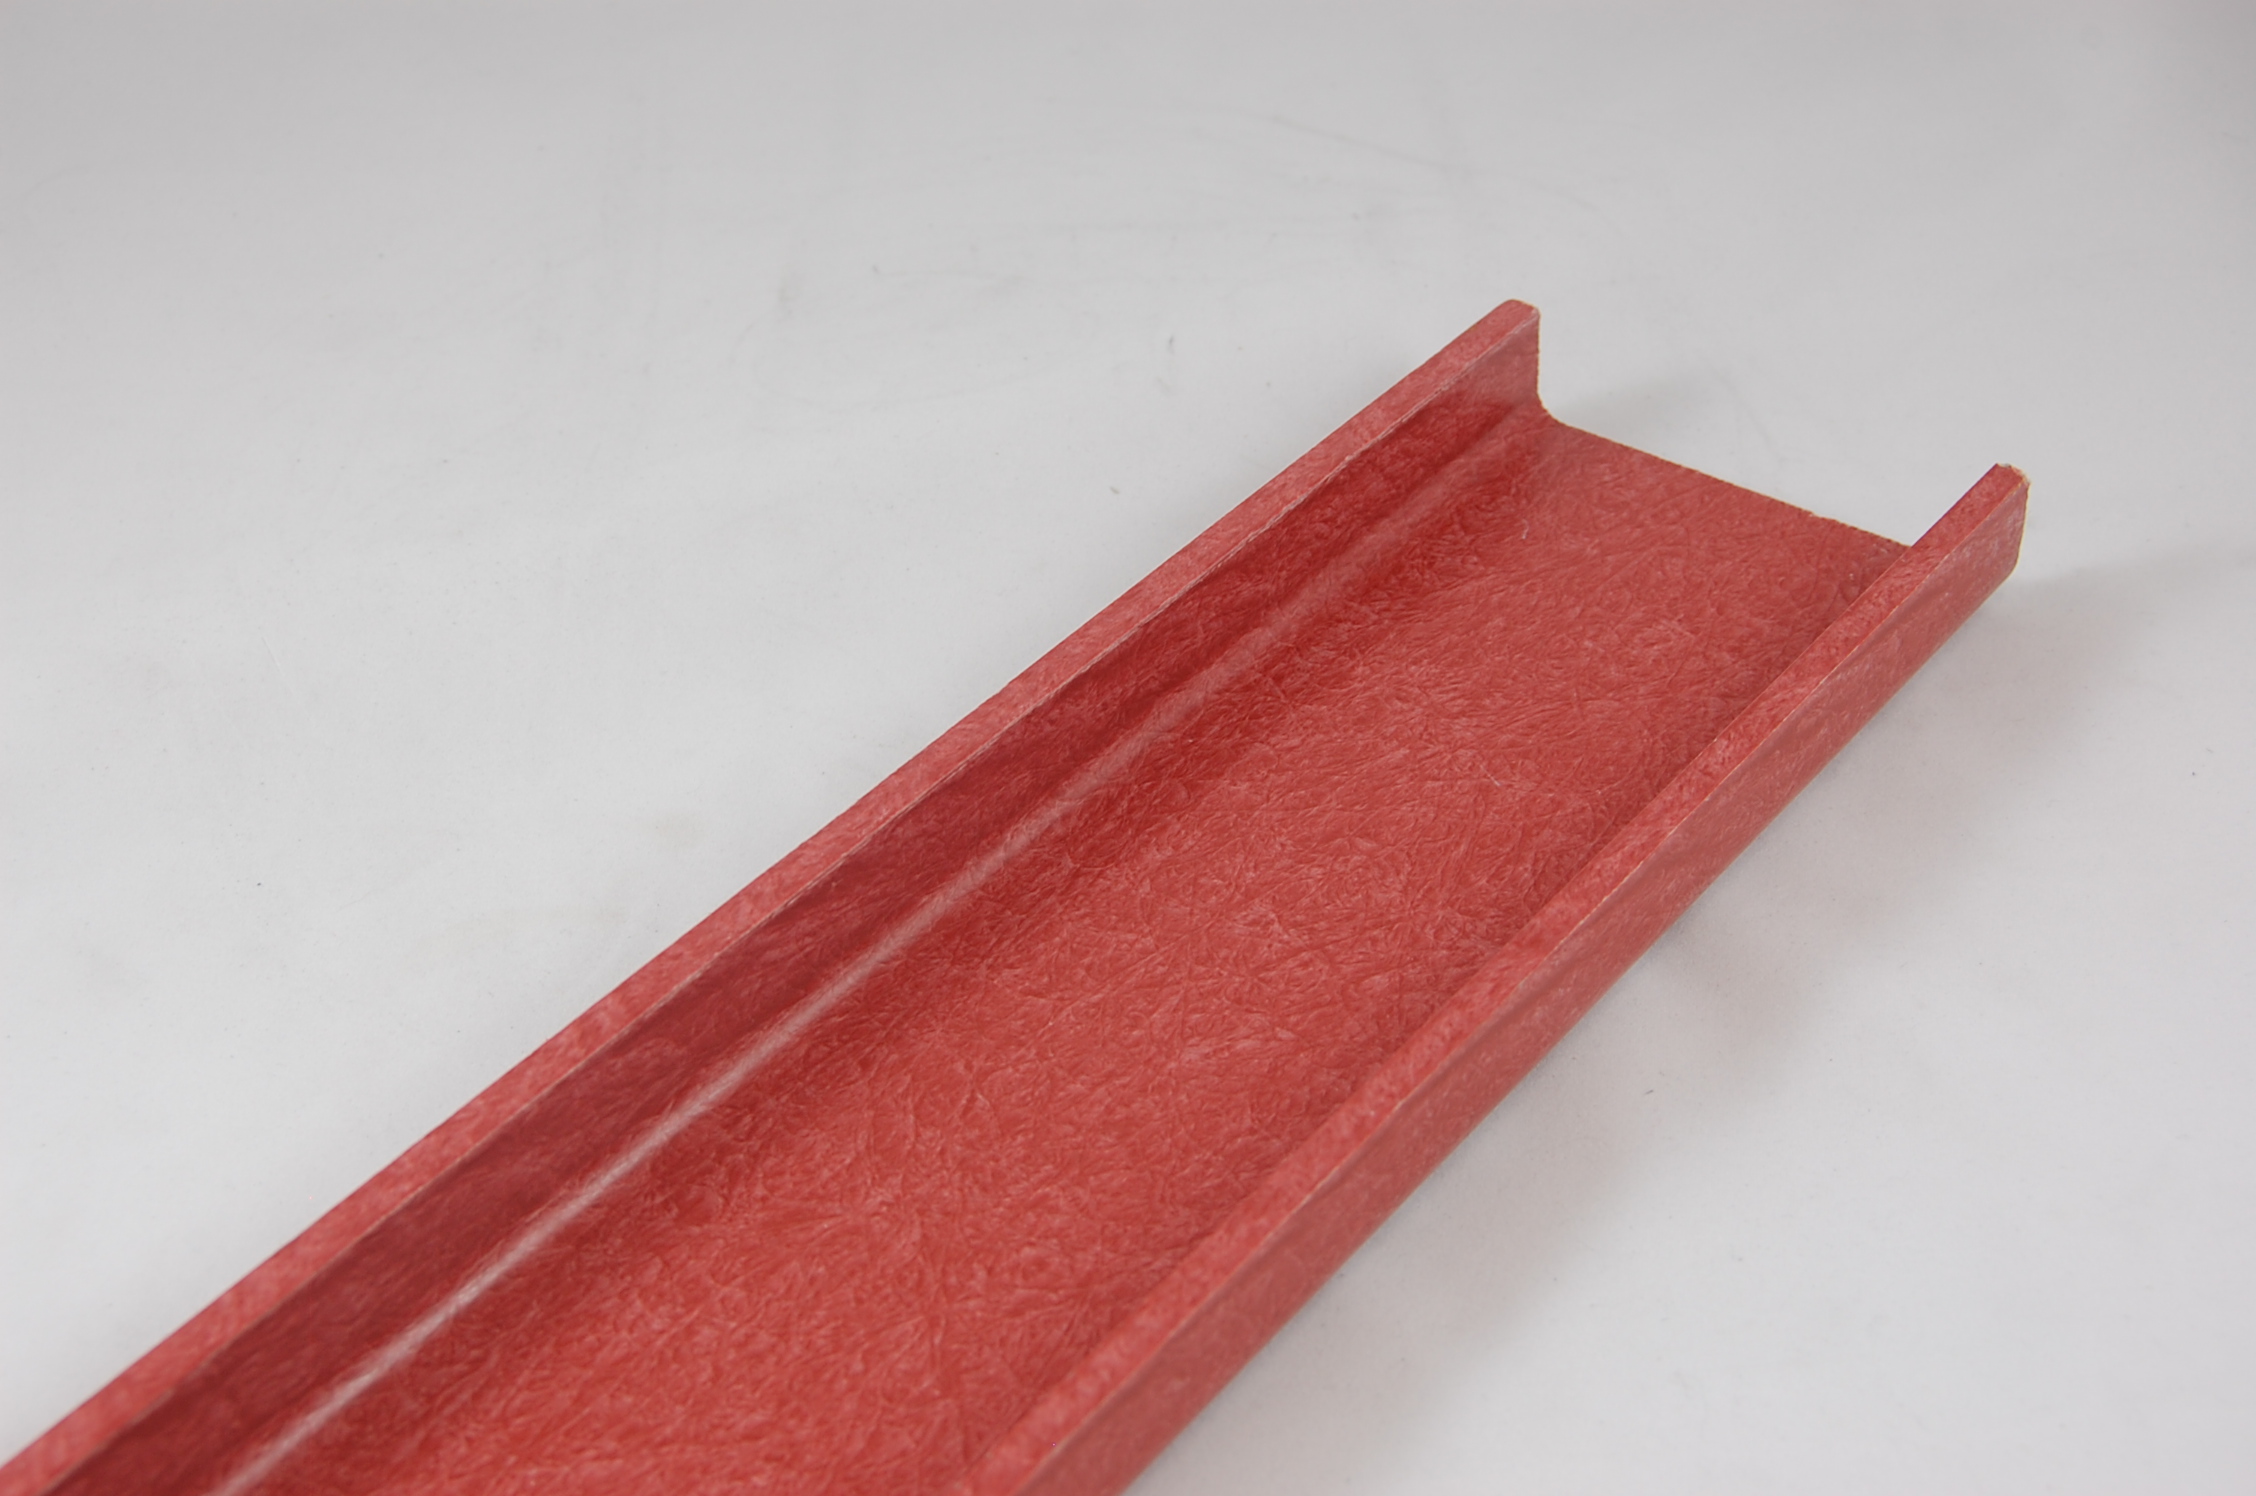 8-1/2"W x 2-11/16" Leg x 3/16" thick GLASROD® Grade 1130 Fiberglass-Reinforced Polyester Laminate Channel, red,  120"L channel